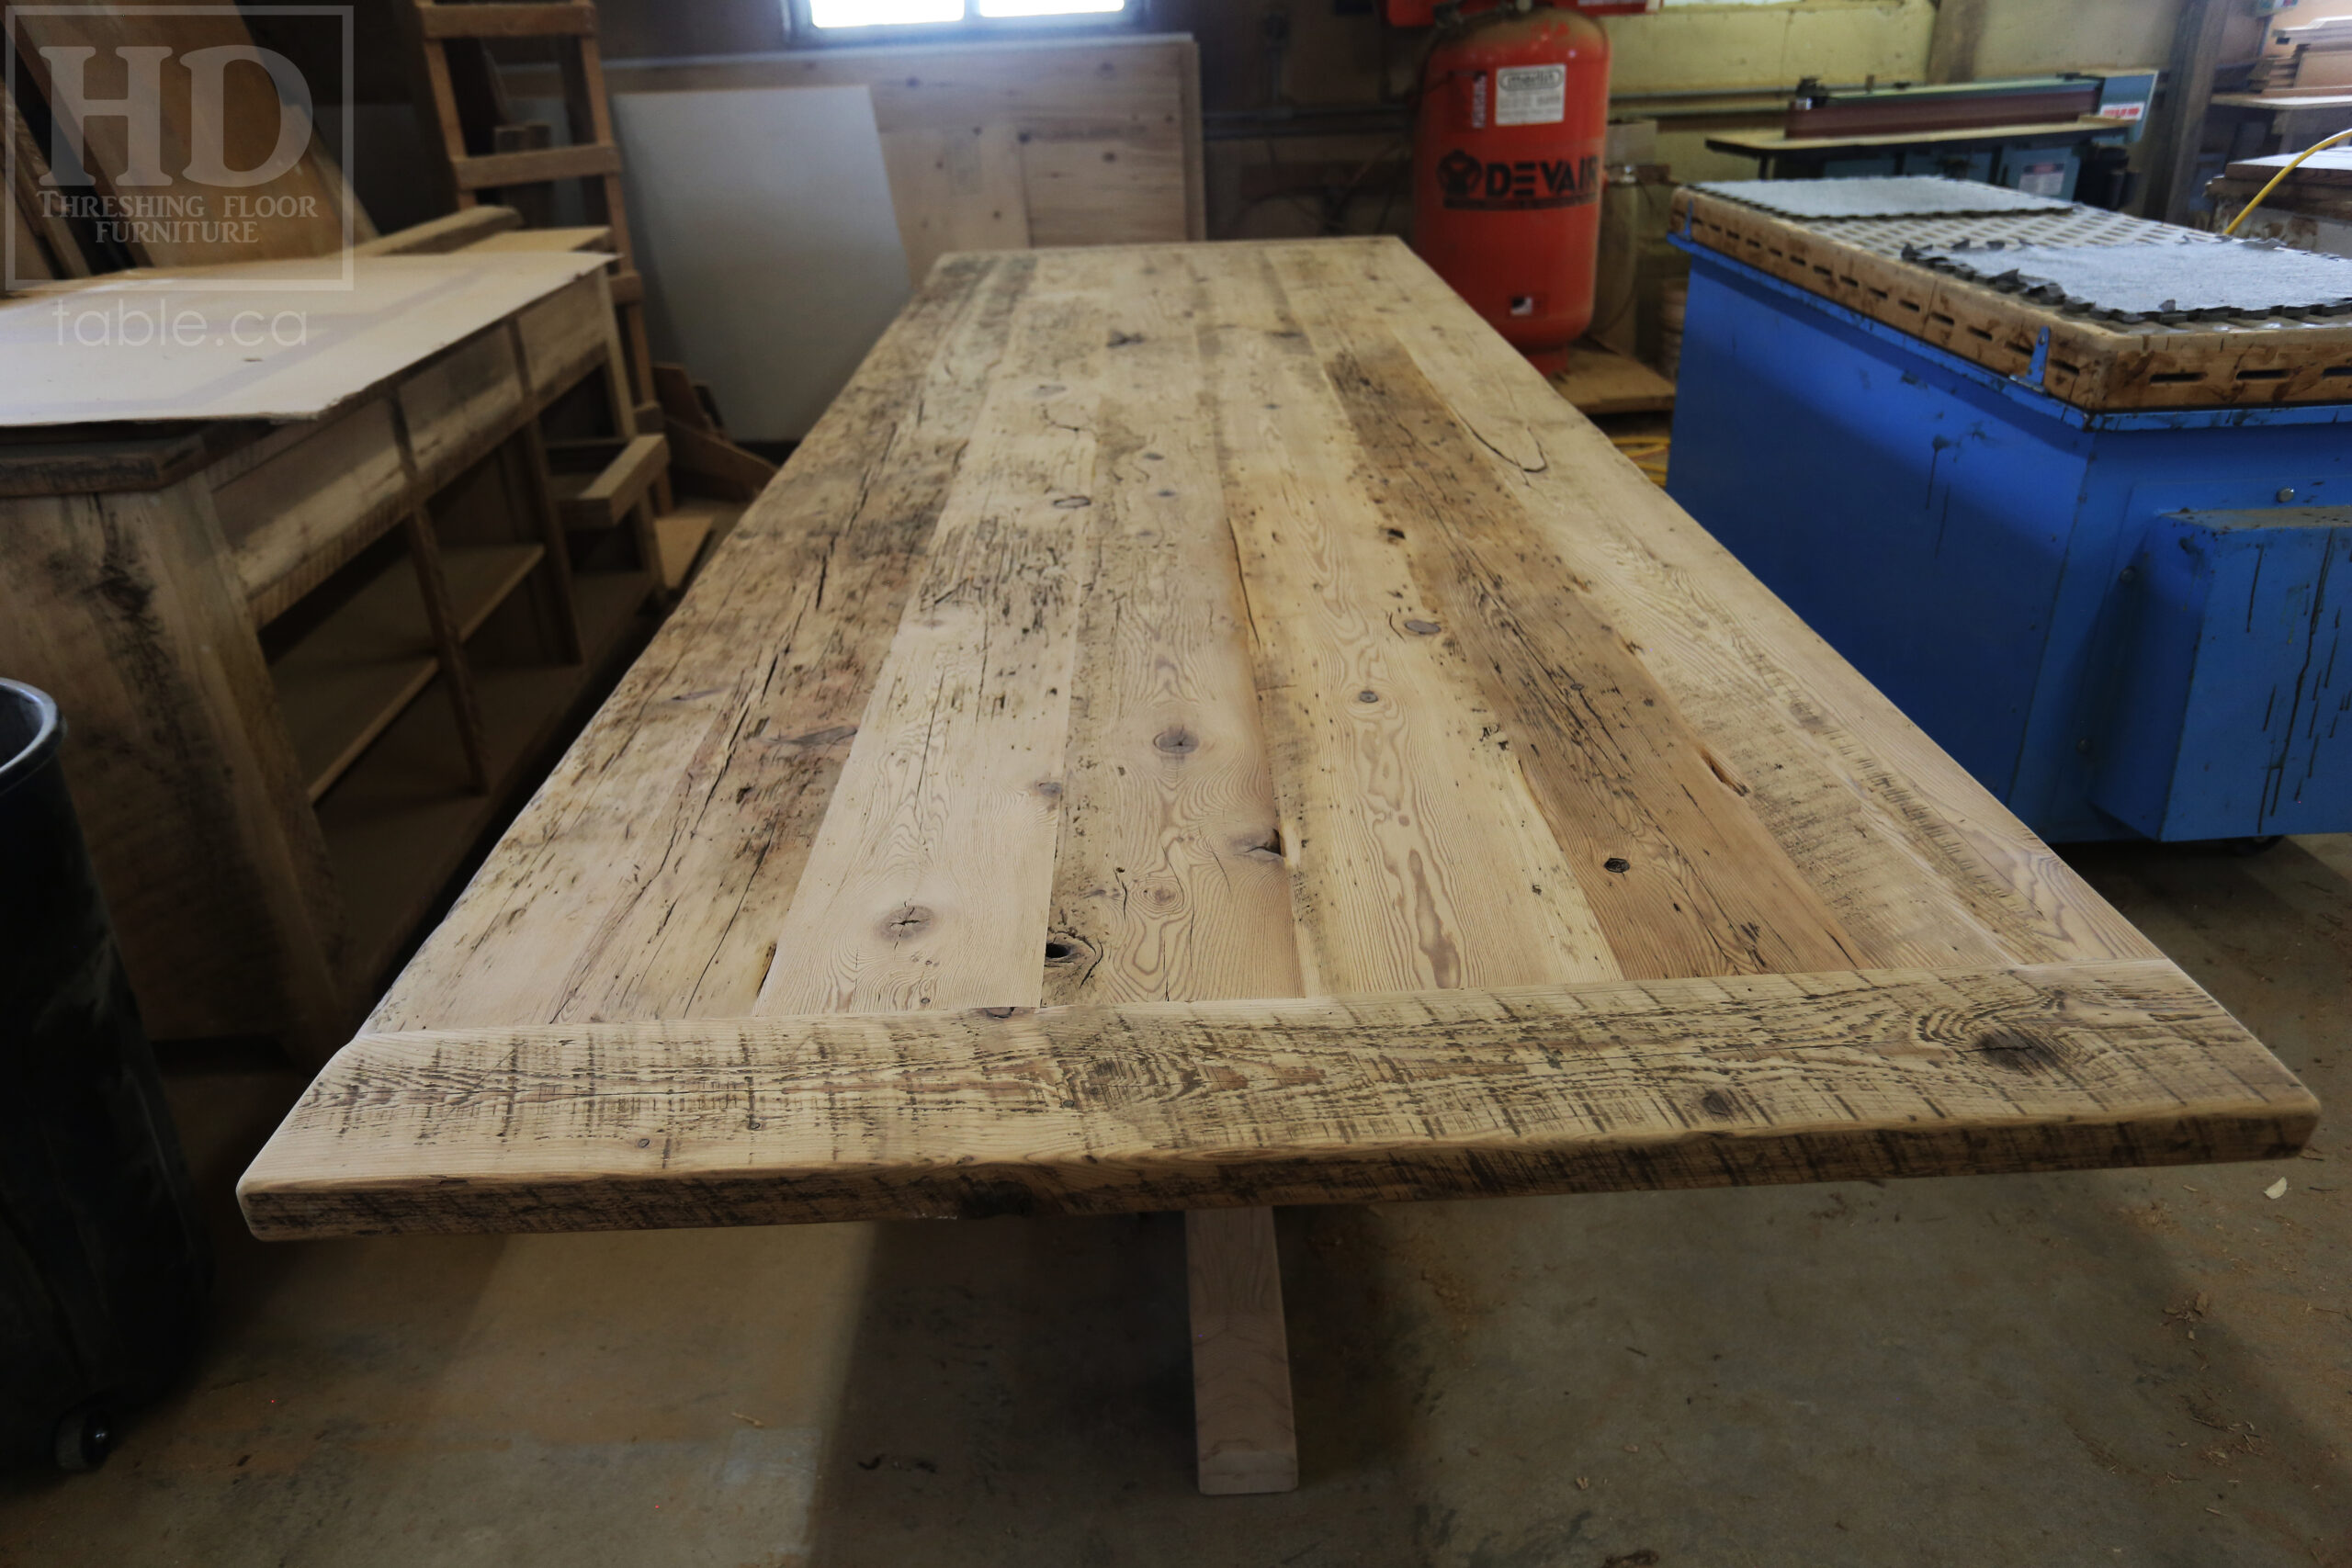 Project Summary: 12’ Reclaimed Ontario Barnwood Table we made for a Fergus, Ontario Company – 48” wide – Metal Logo Embedded - Hand Hewn Beam Pedestals Base - Old Growth Hemlock Threshing Floor Construction - Original edges & distressing maintained – Bread Edge Boards – Greytone Option - Premium epoxy + satin polyurethane finish – www.table.ca